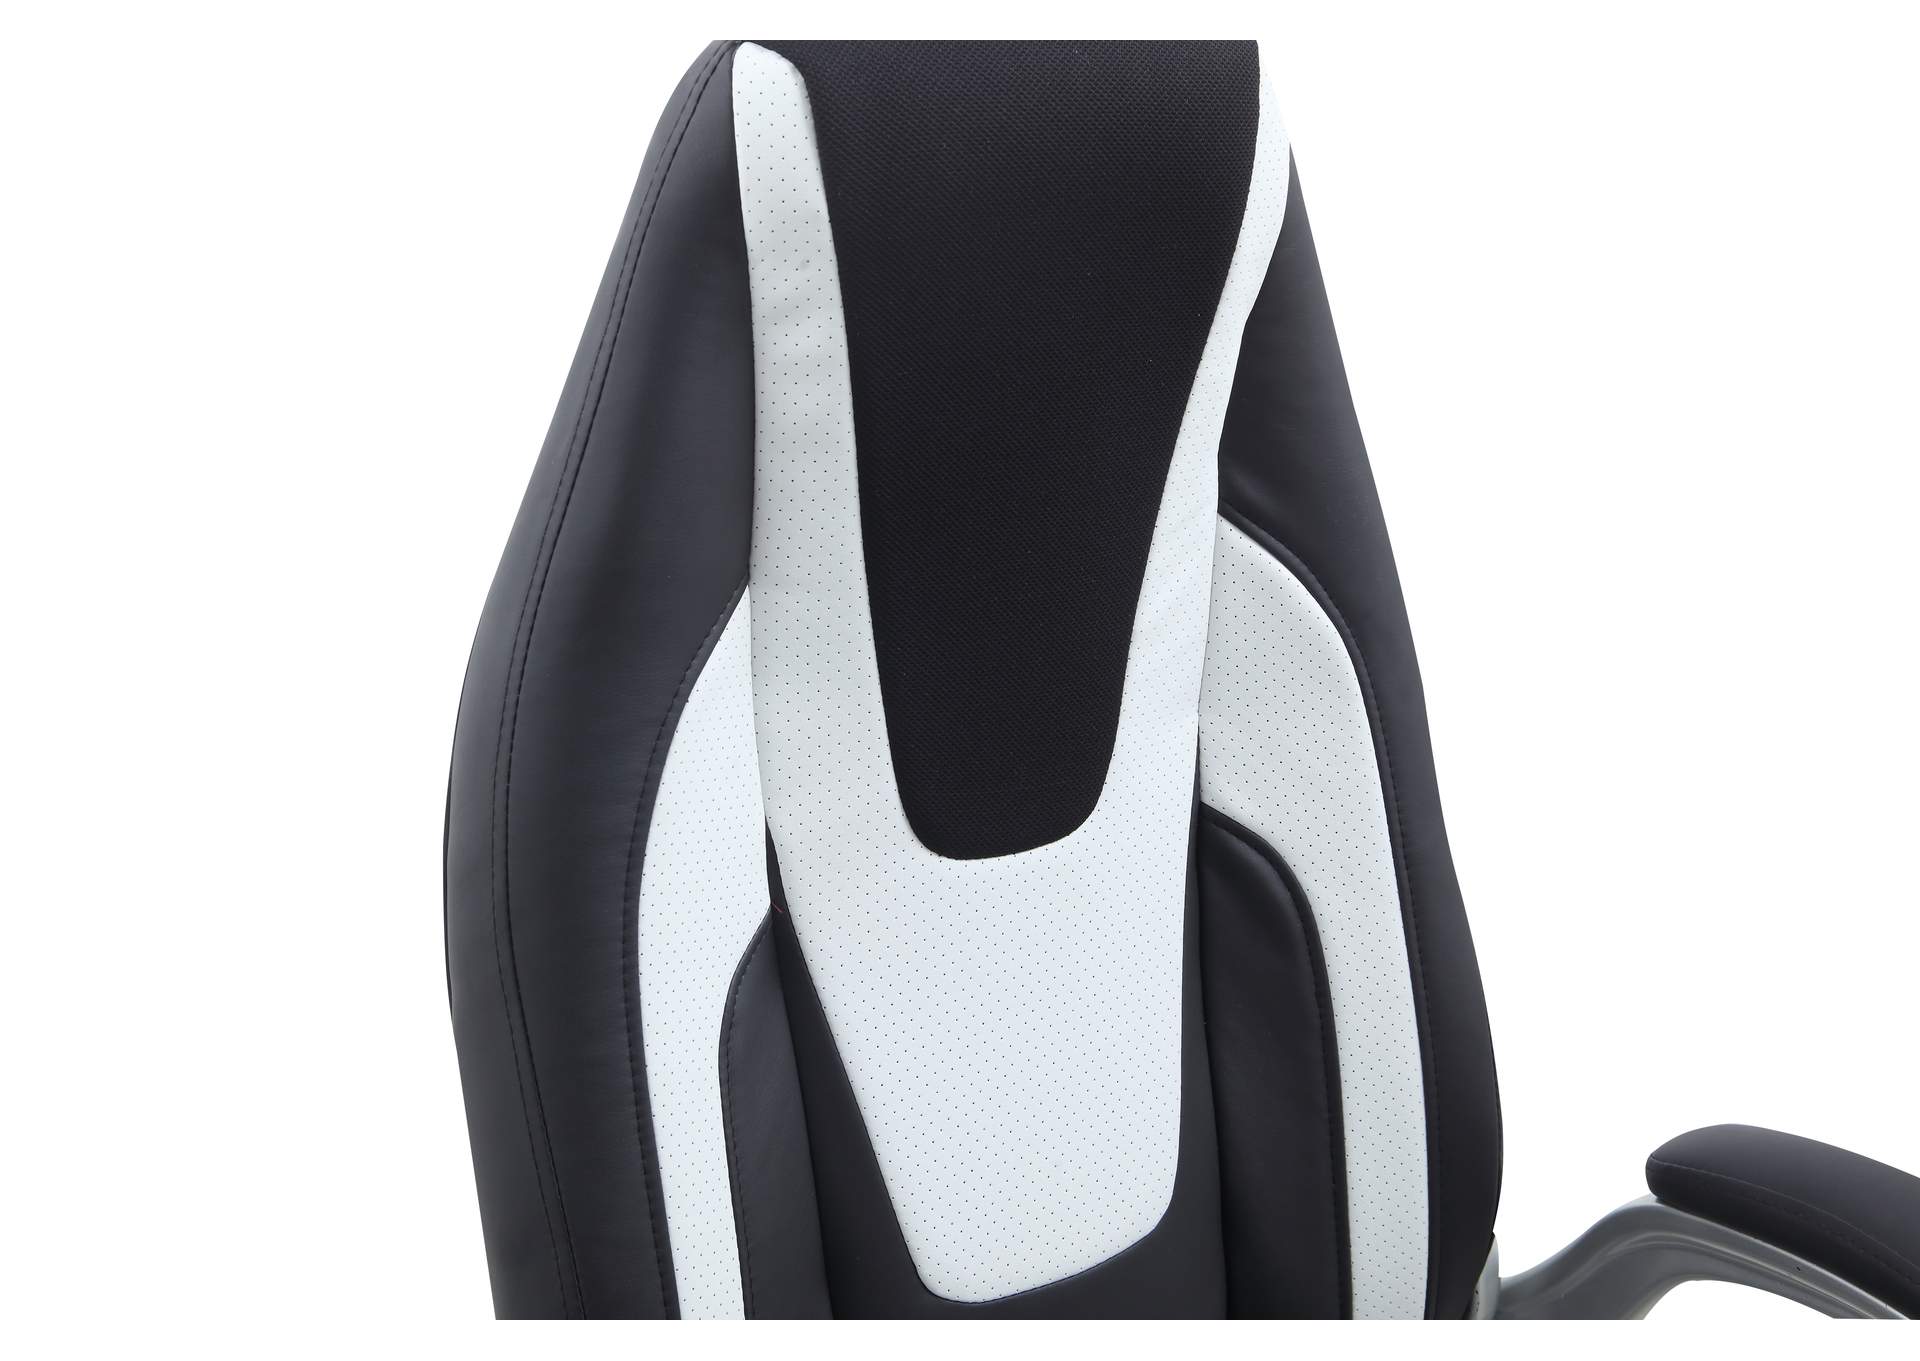 Modern Ergonomic 2-Tone Adjustable Computer Chair,Chintaly Imports